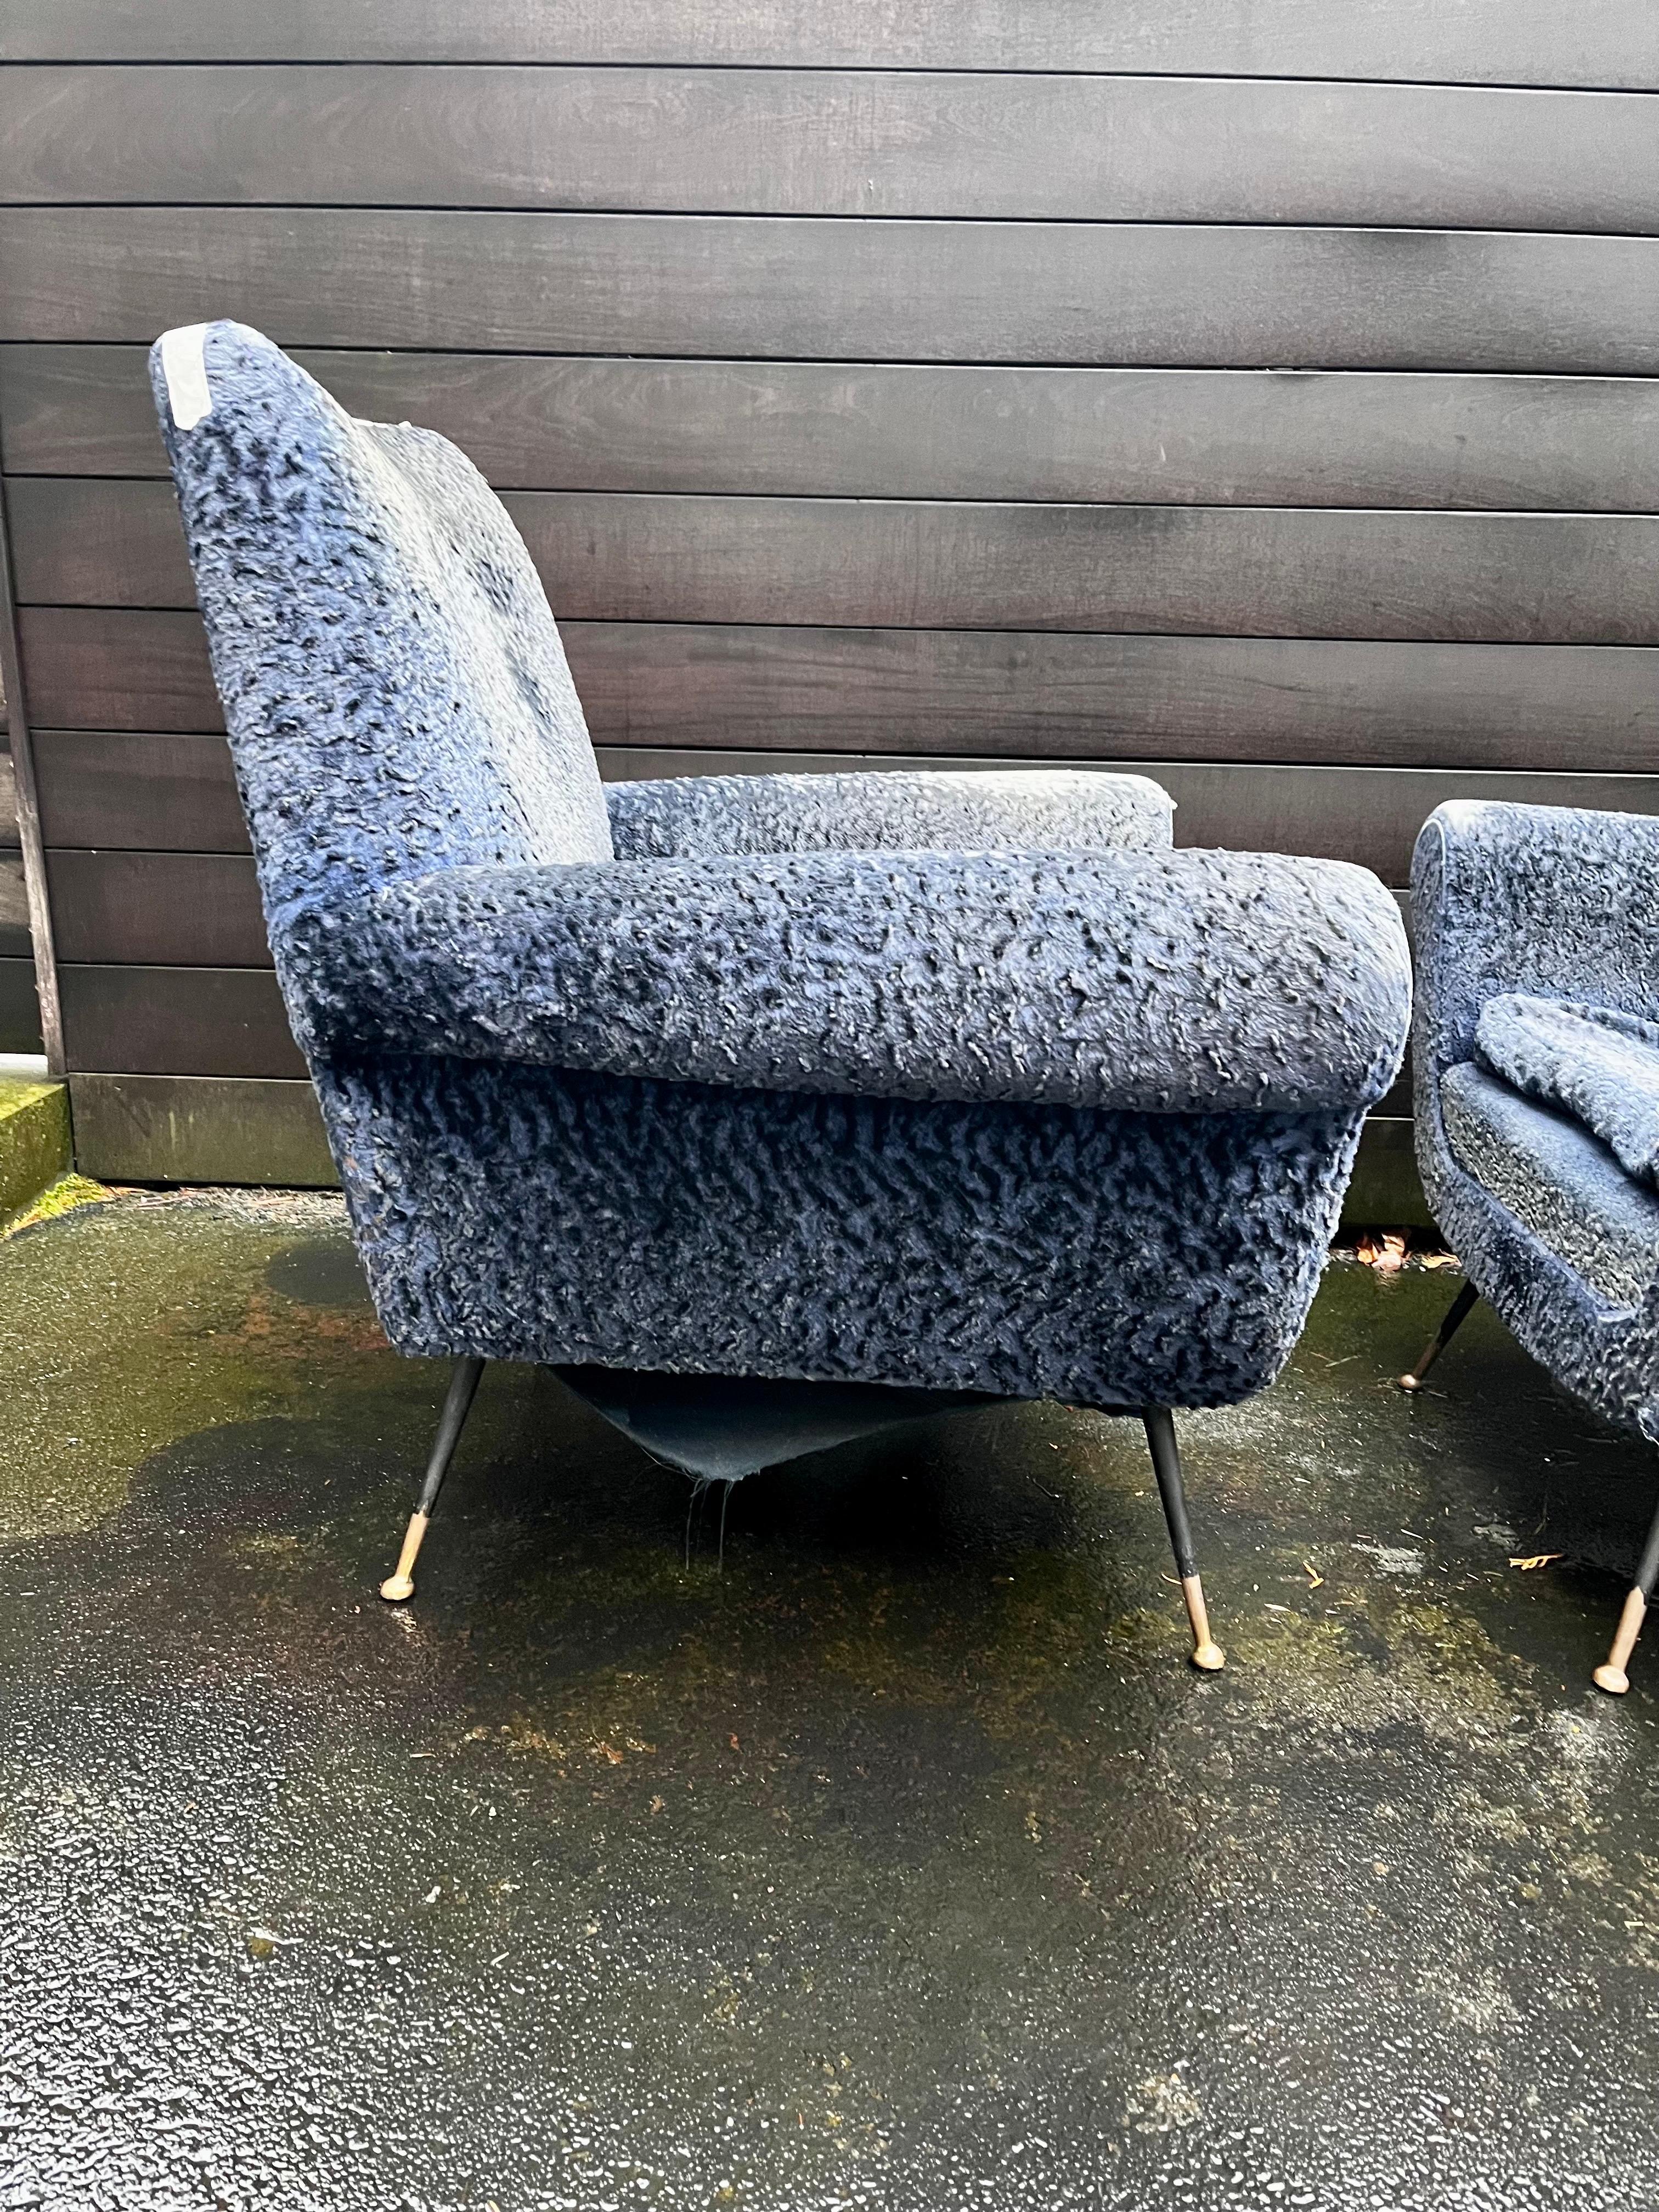 Pair of Gigi Radice Club Chairs for Minotti, c. 1950 (for restoration) For Sale 1